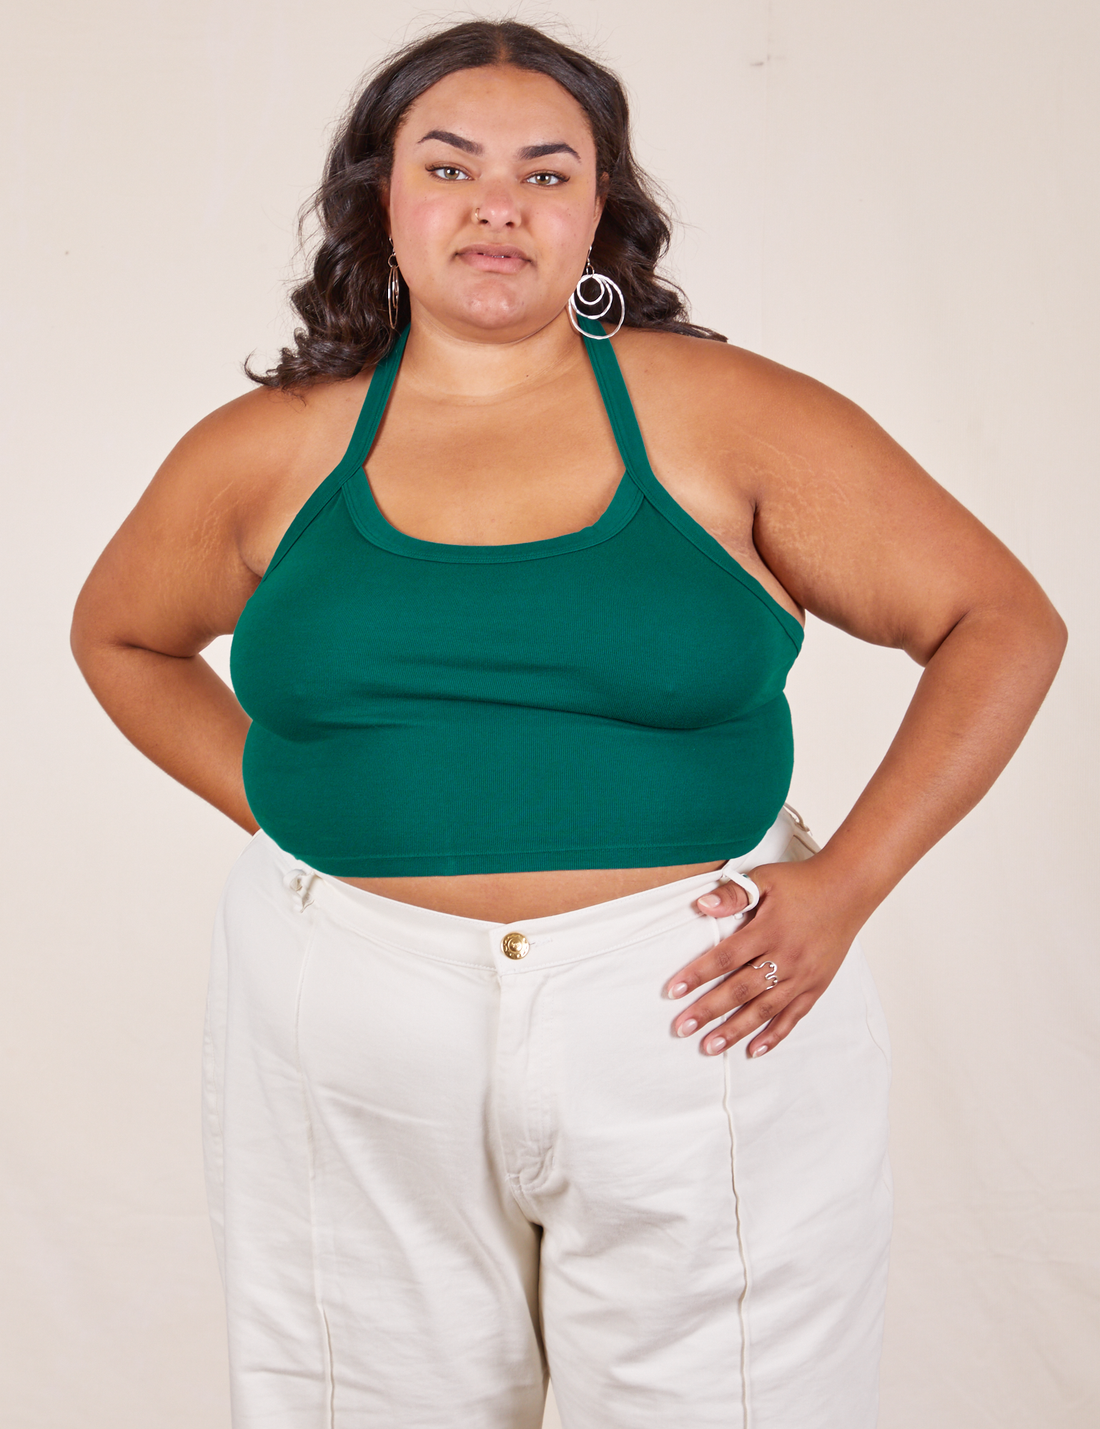 Alicia is 5'9" and wearing XL Halter Top in Hunter Green paired with vintage off-white Western Pants